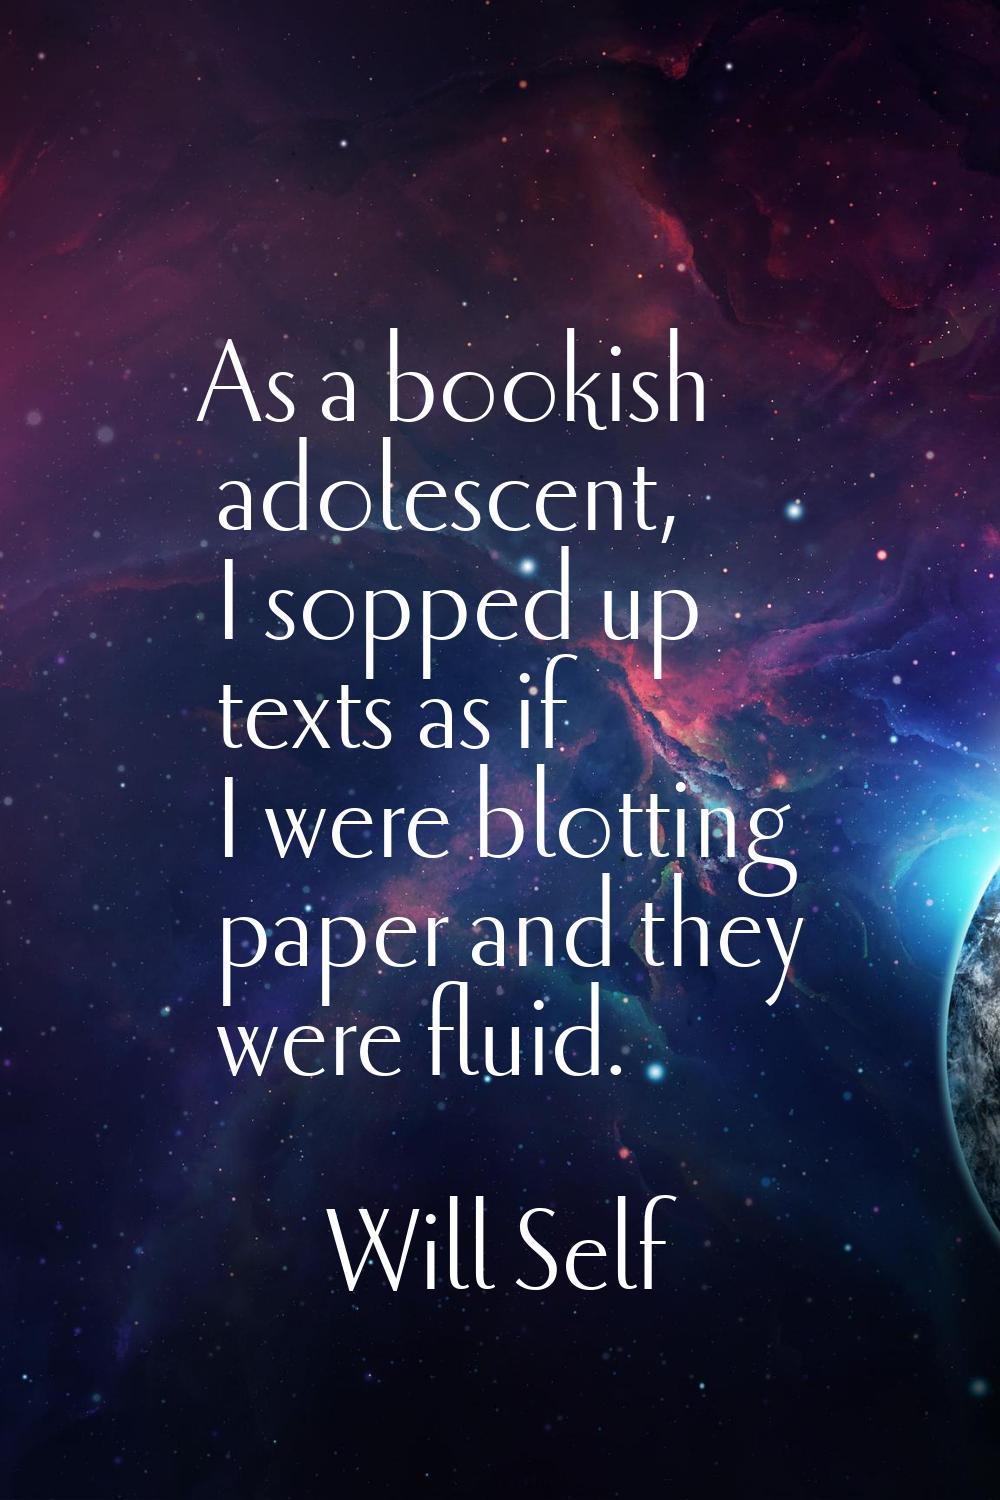 As a bookish adolescent, I sopped up texts as if I were blotting paper and they were fluid.